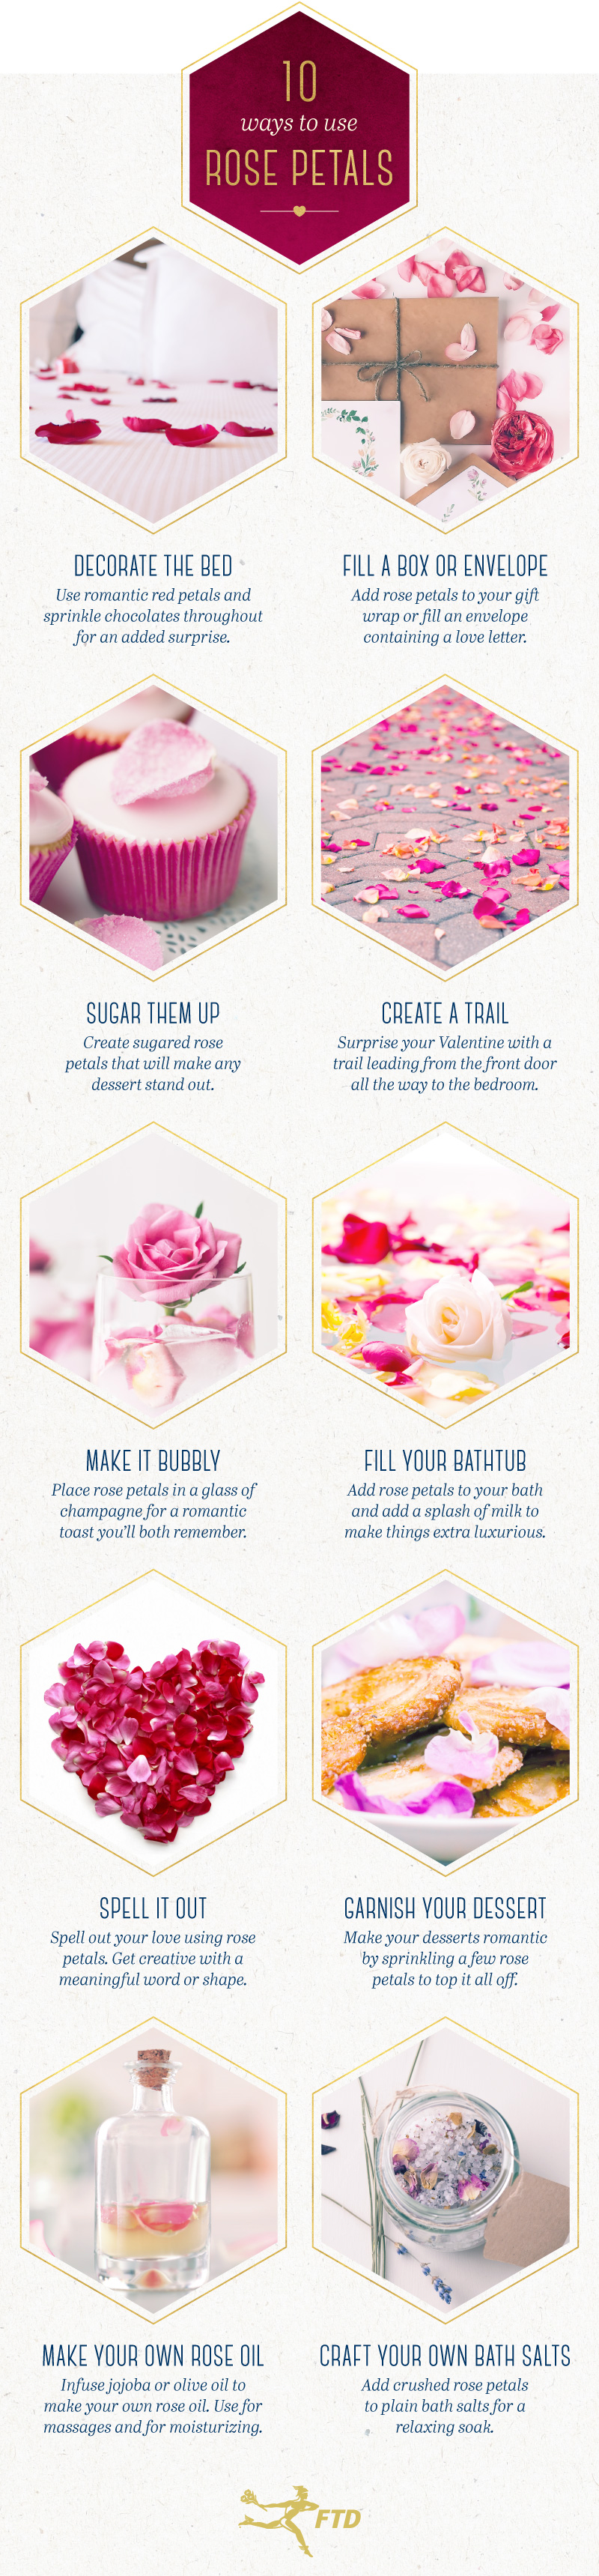 23 Romantic Ways to Use Rose Petals for Valentine's Day - FTD.com